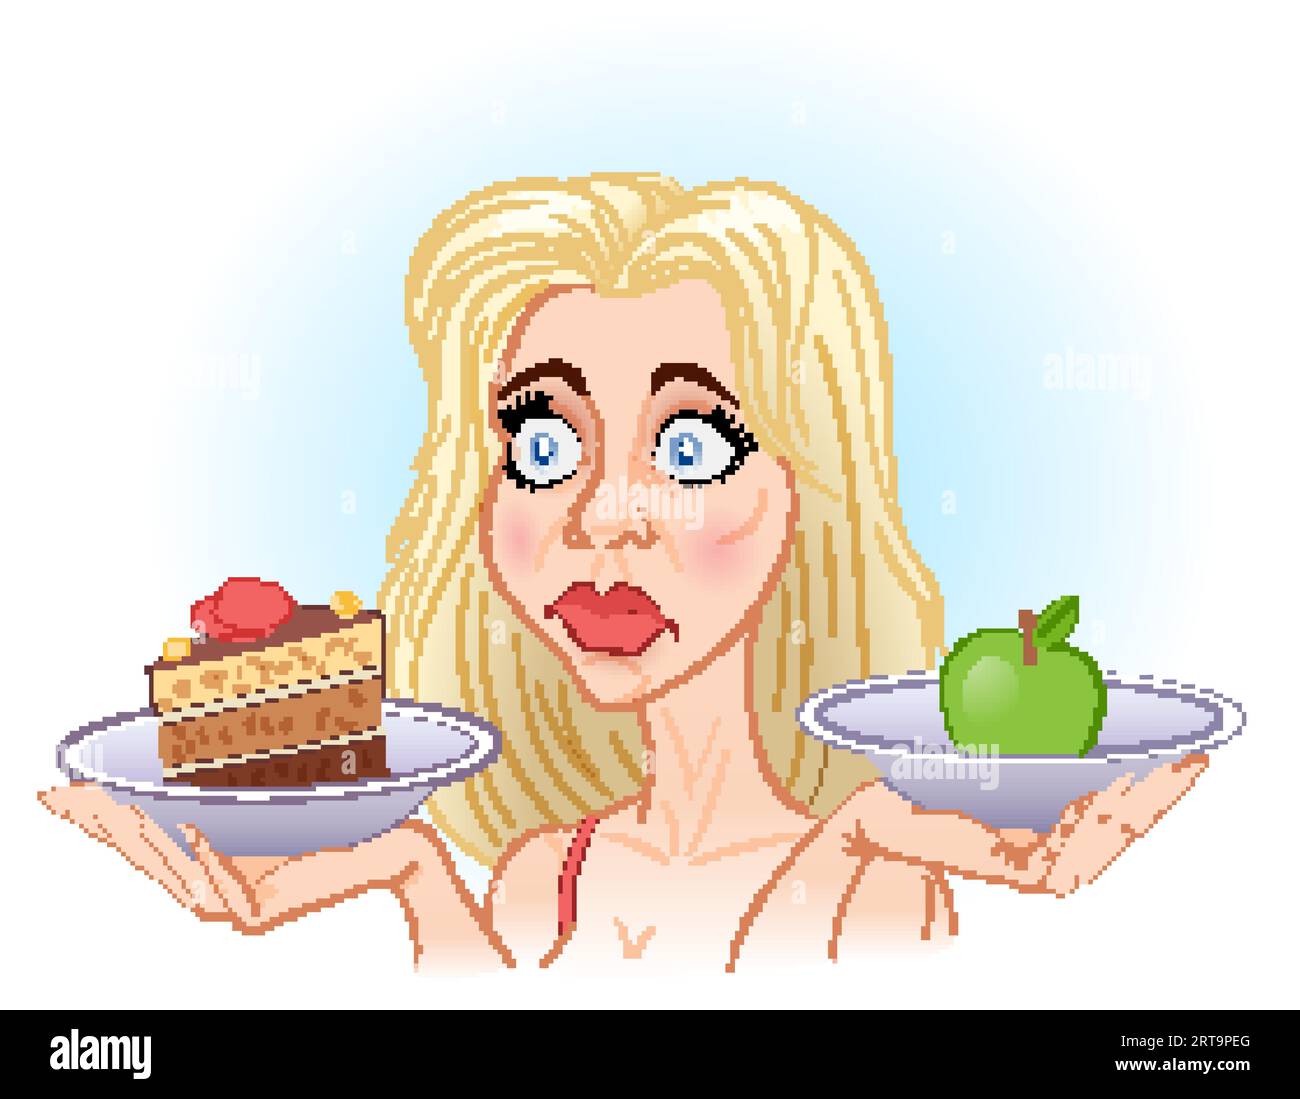 Hard to Make Right Choice. A blonde Woman Holding a Piece of Cake, One Hand and Green Apple in Another. Illustration of Young Girl Makes Choice in Die Stock Vector